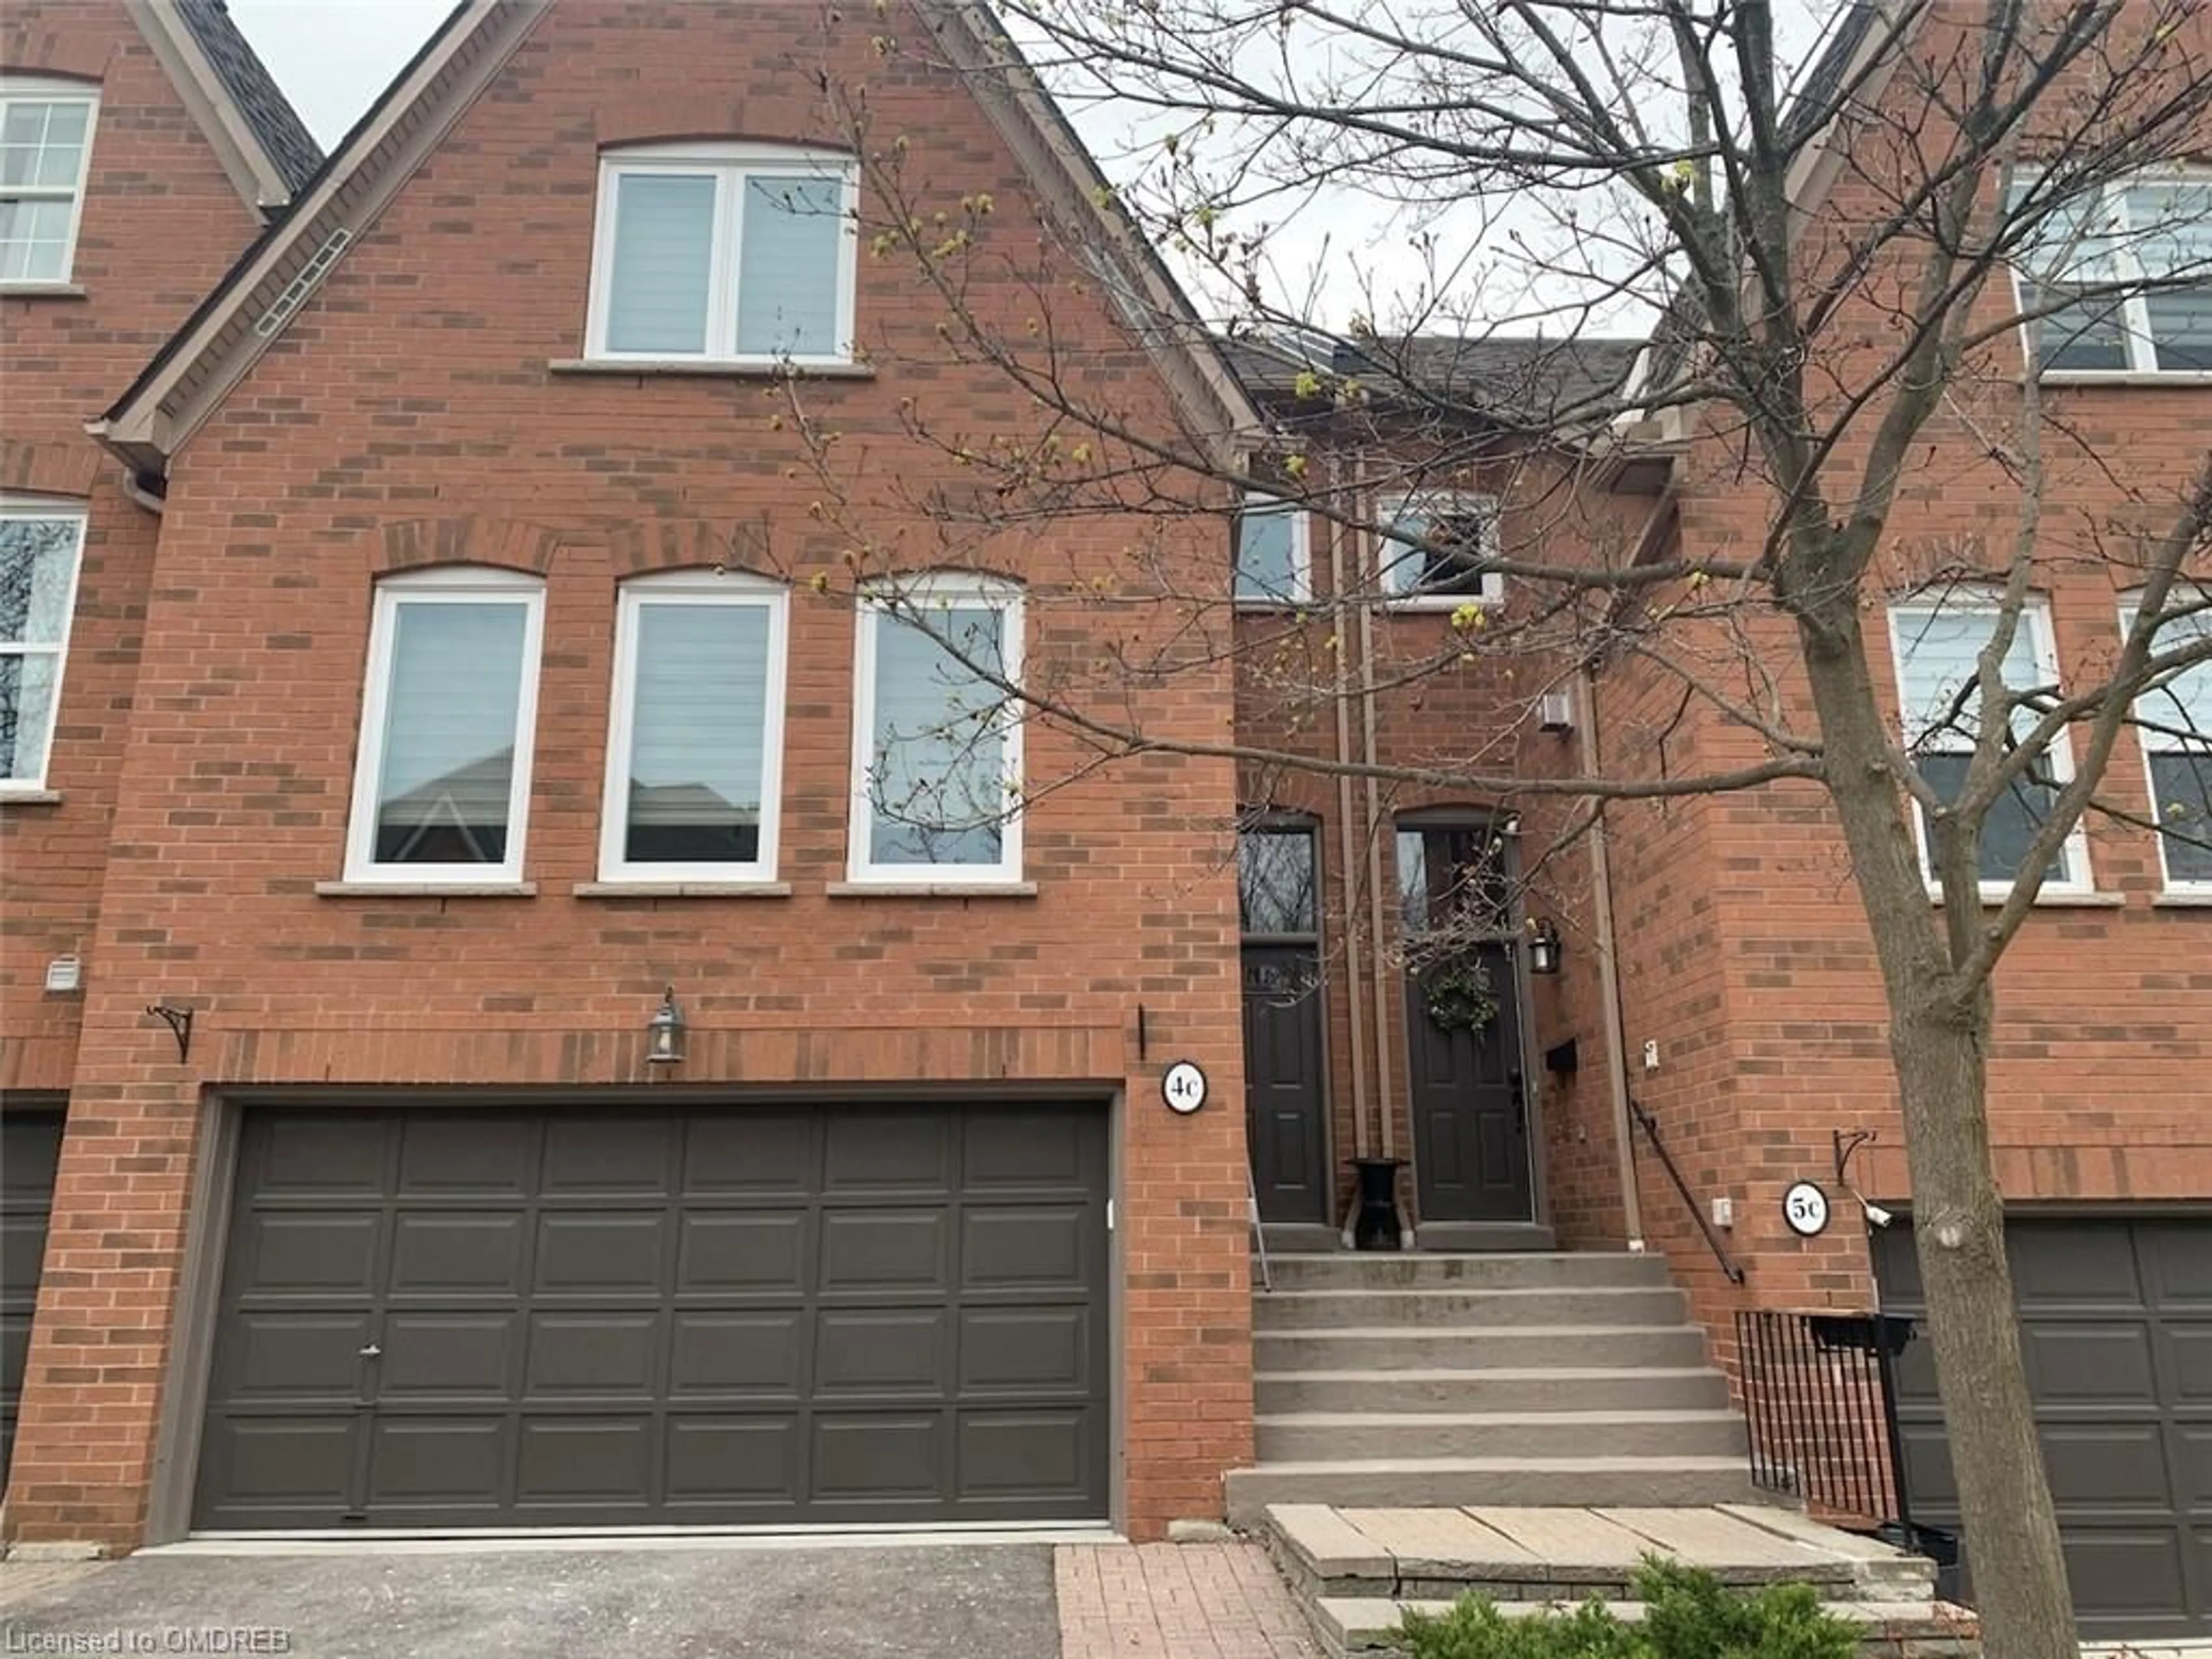 Home with brick exterior material for 928 Queen St #4C, Mississauga Ontario L5H 4K5